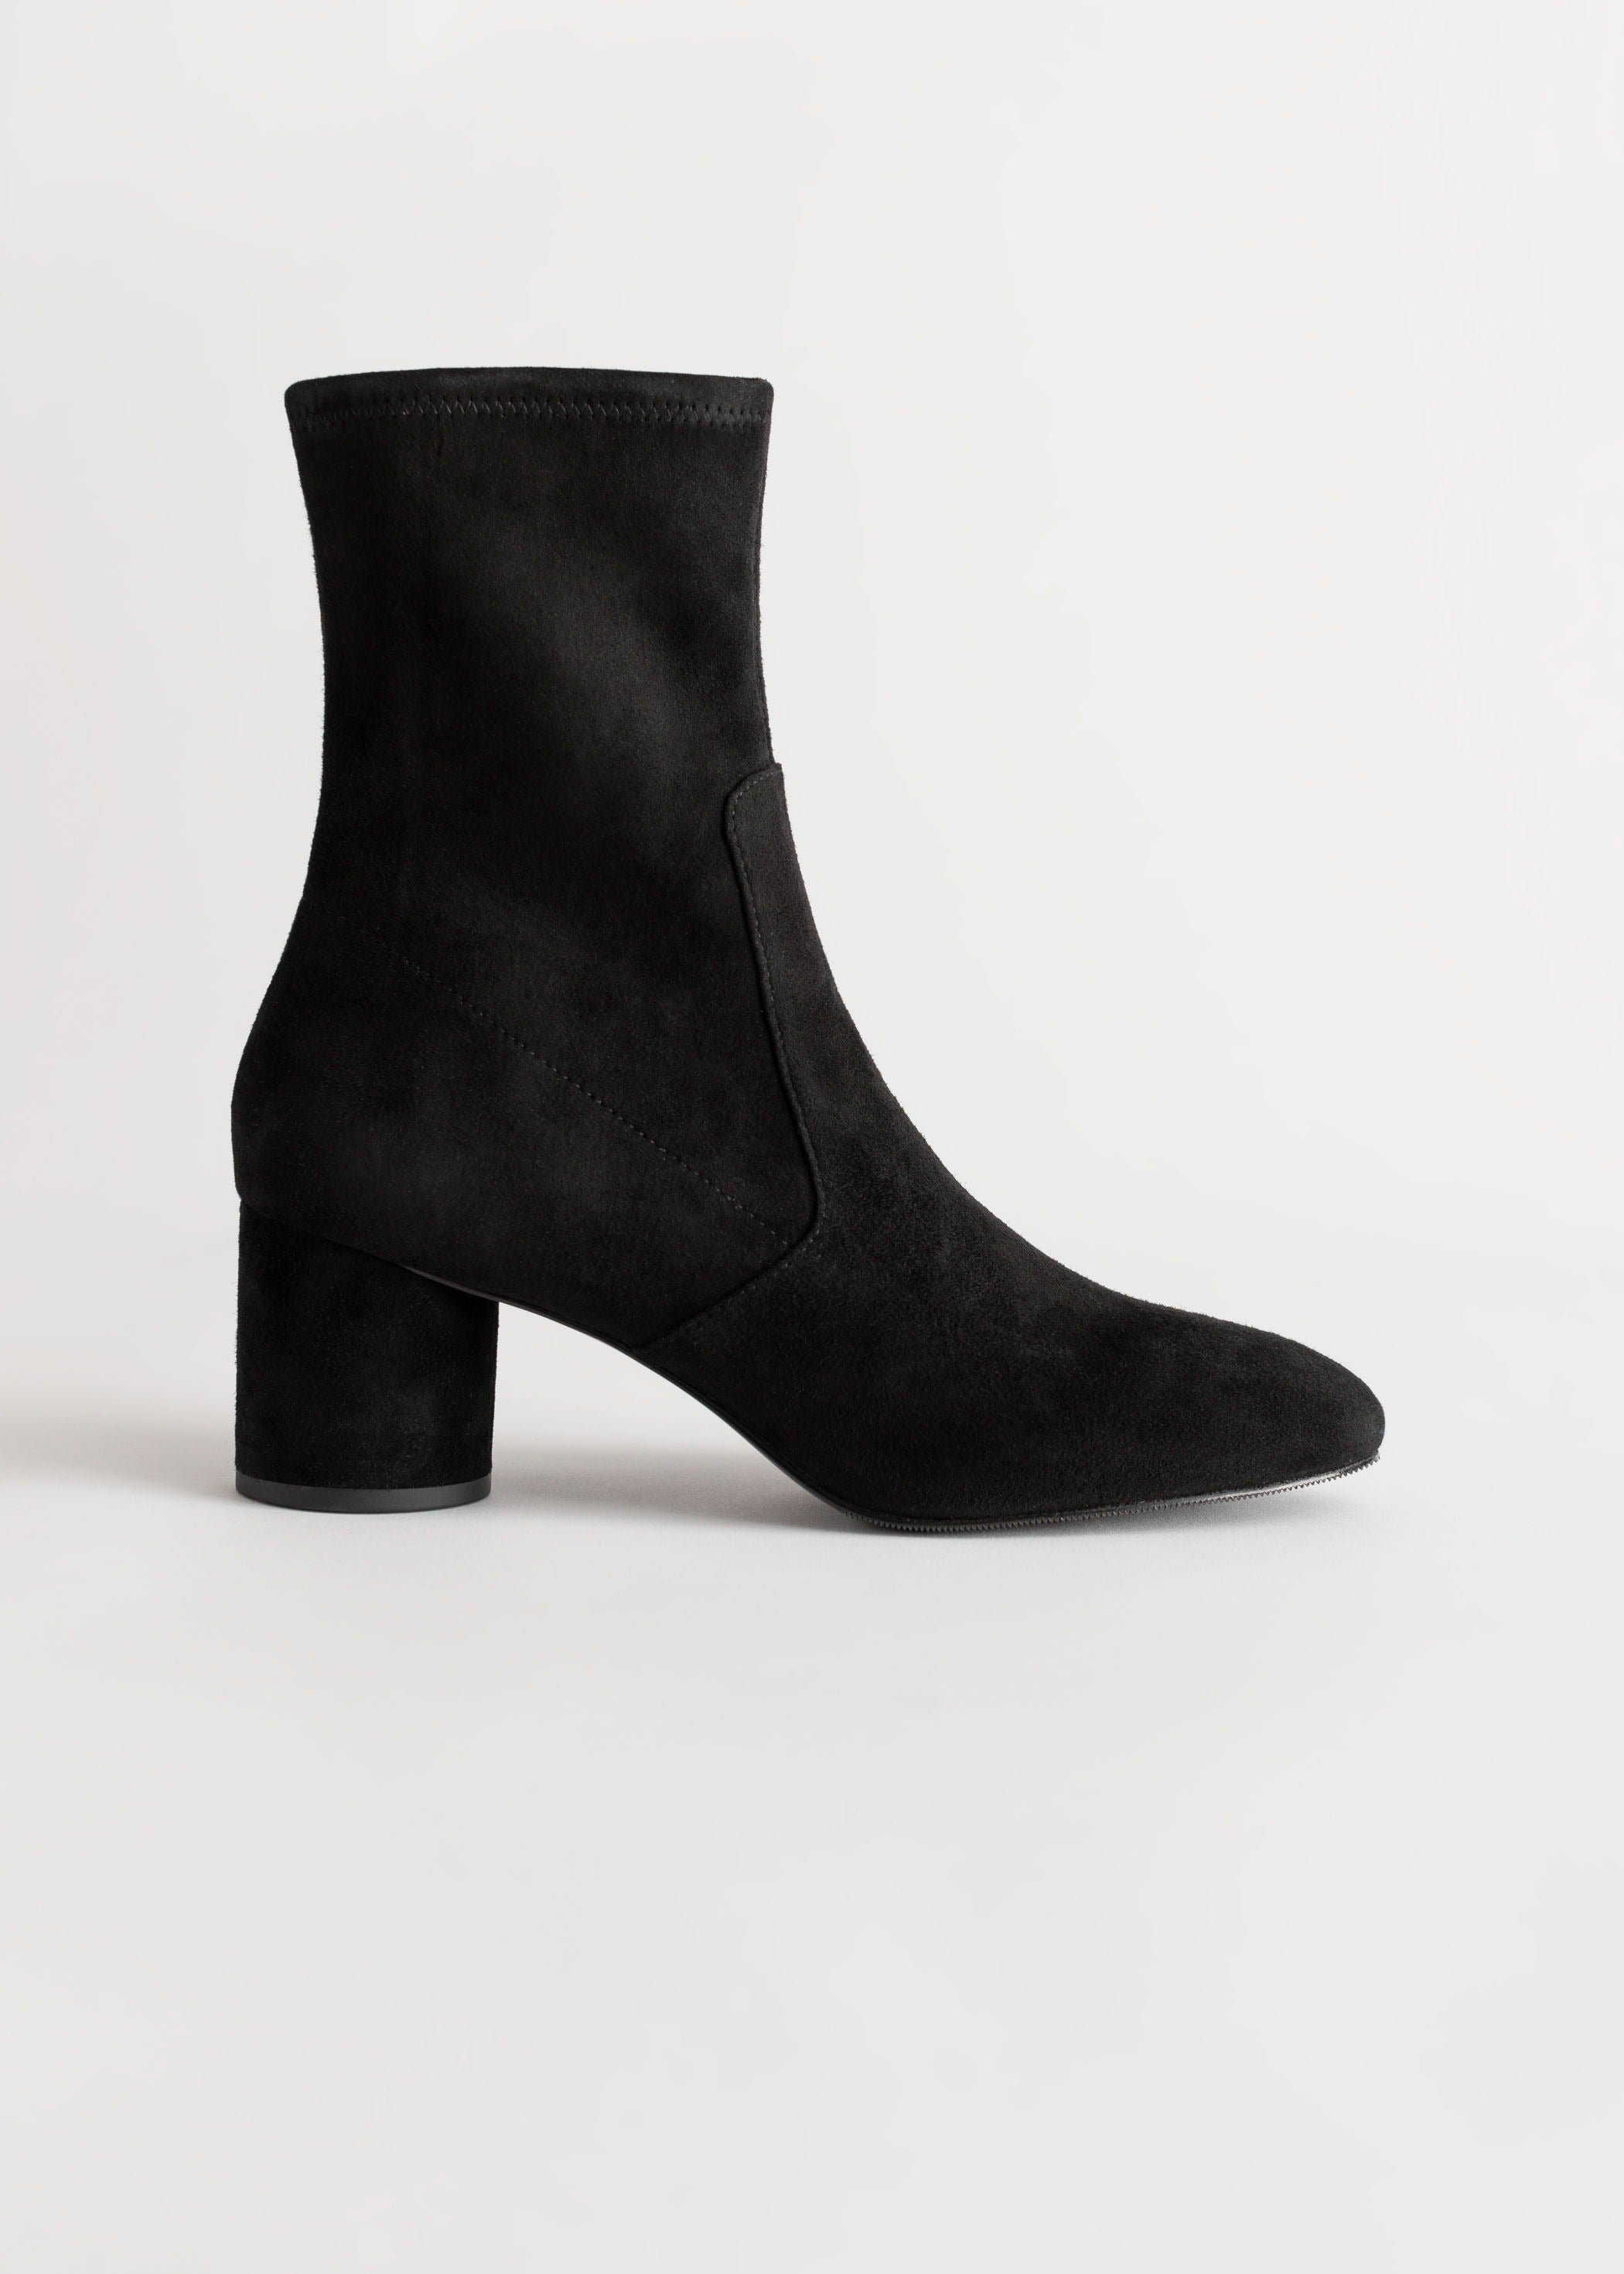 & Other Stories + Suede Almond Toe Sock Boots